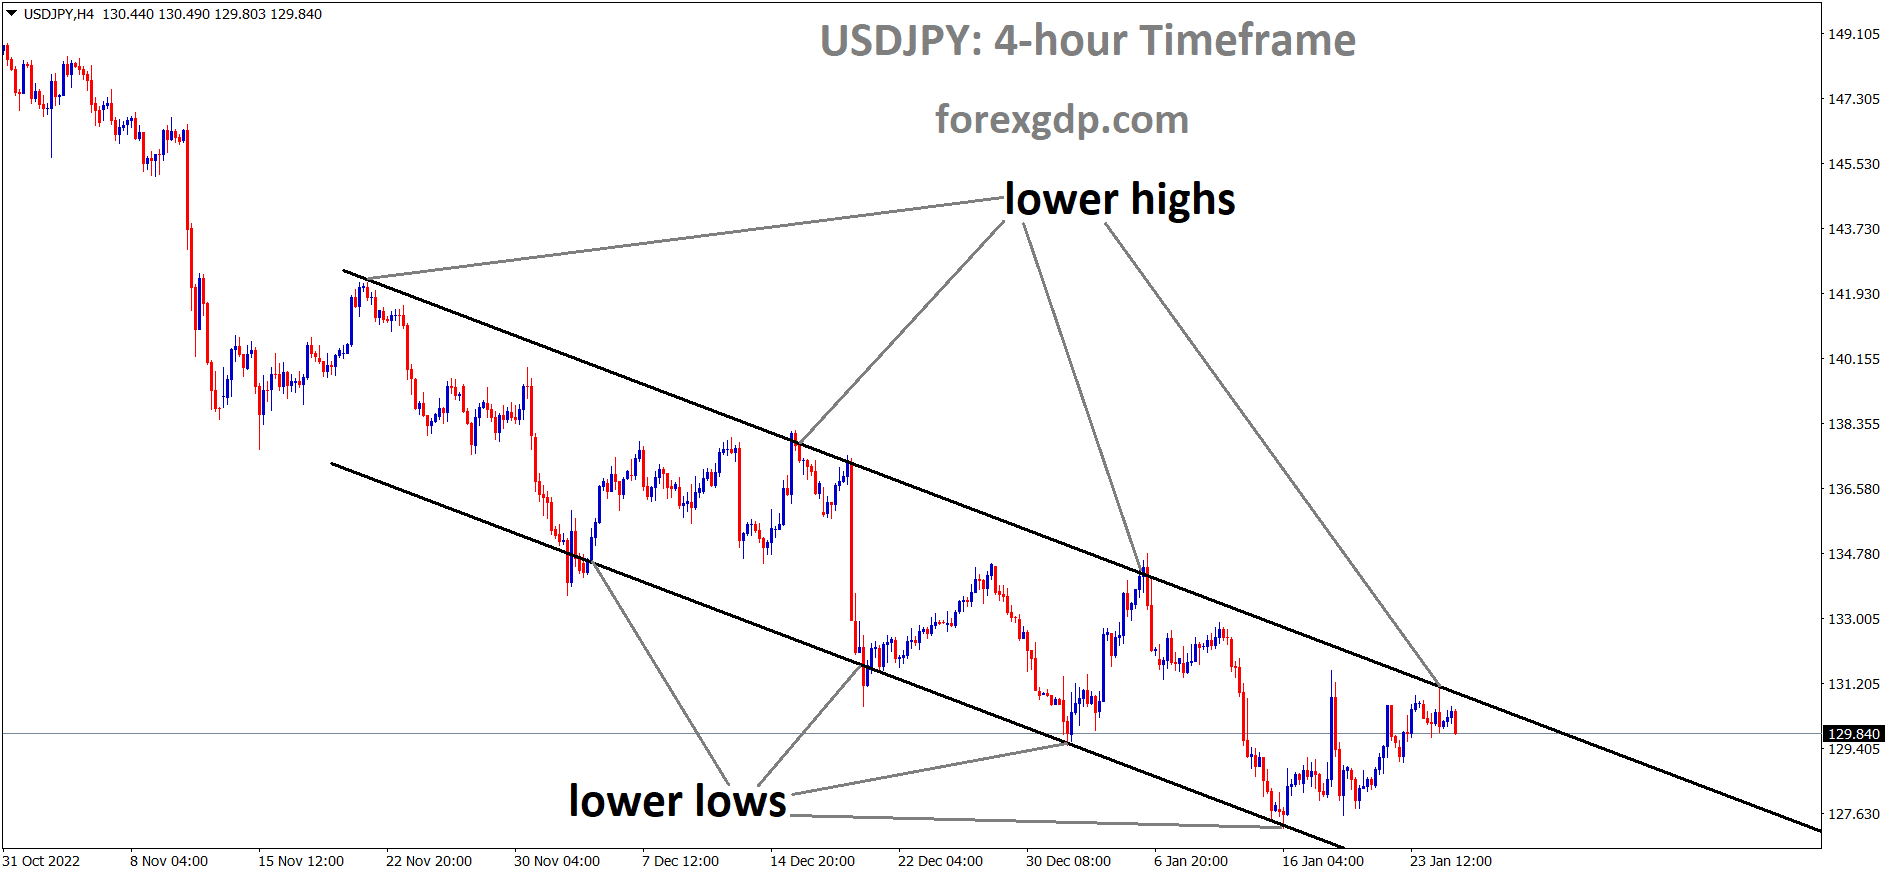 USDJPY is moving in the Descending channel and the market has reached the lower high area of the channel.